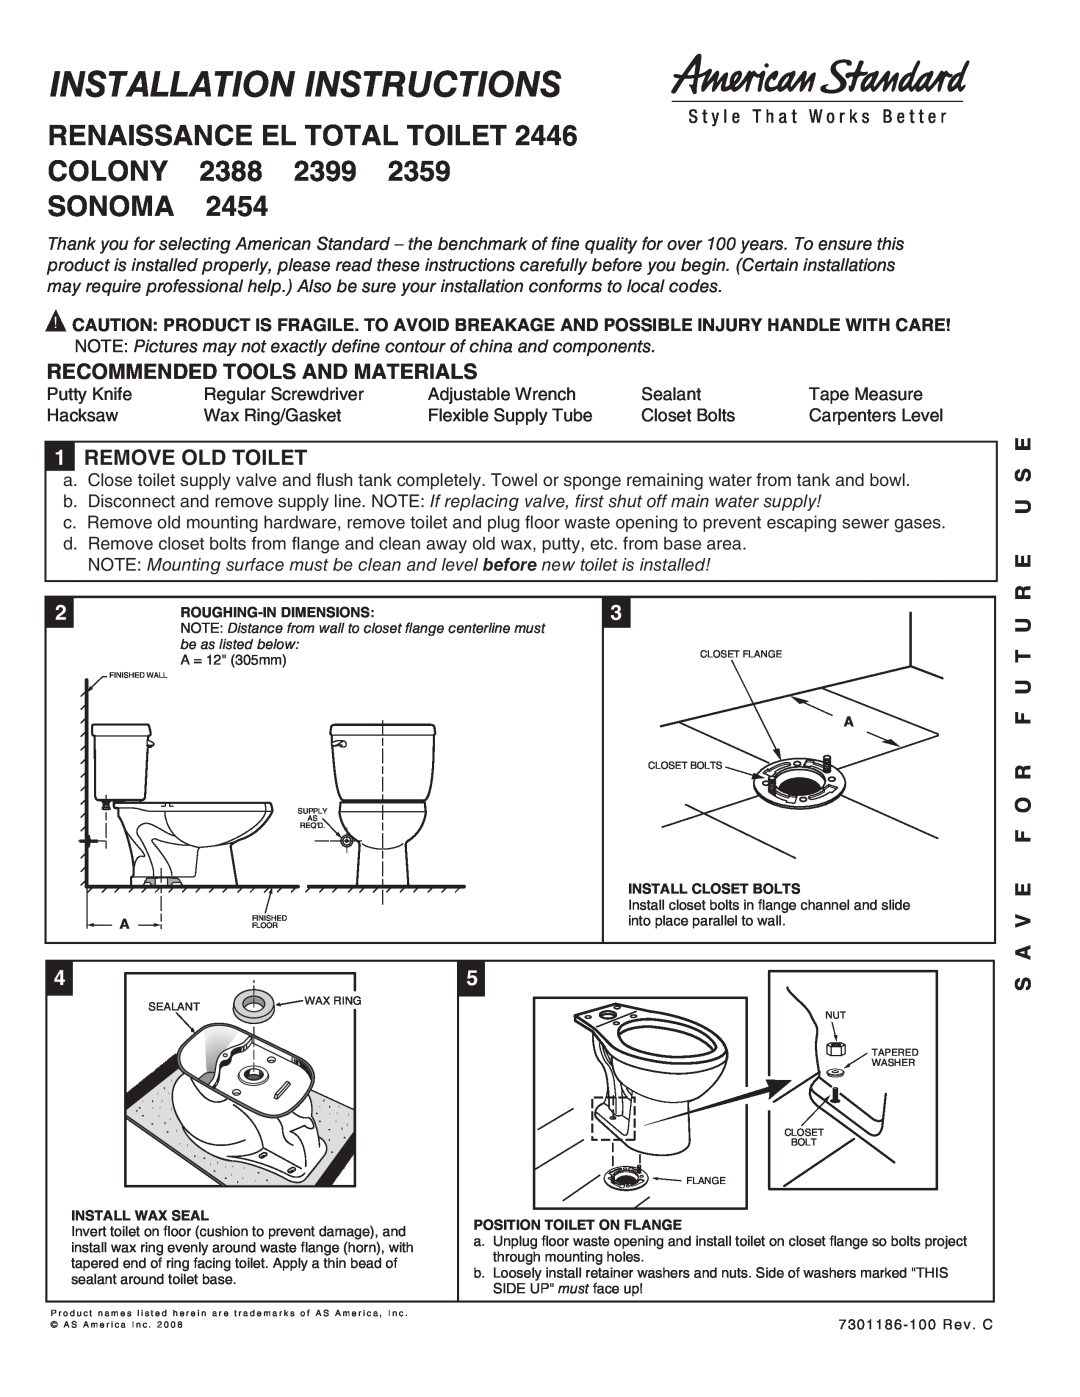 American Standard 2446 installation instructions Recommended Tools And Materials, 1REMOVE OLD TOILET 